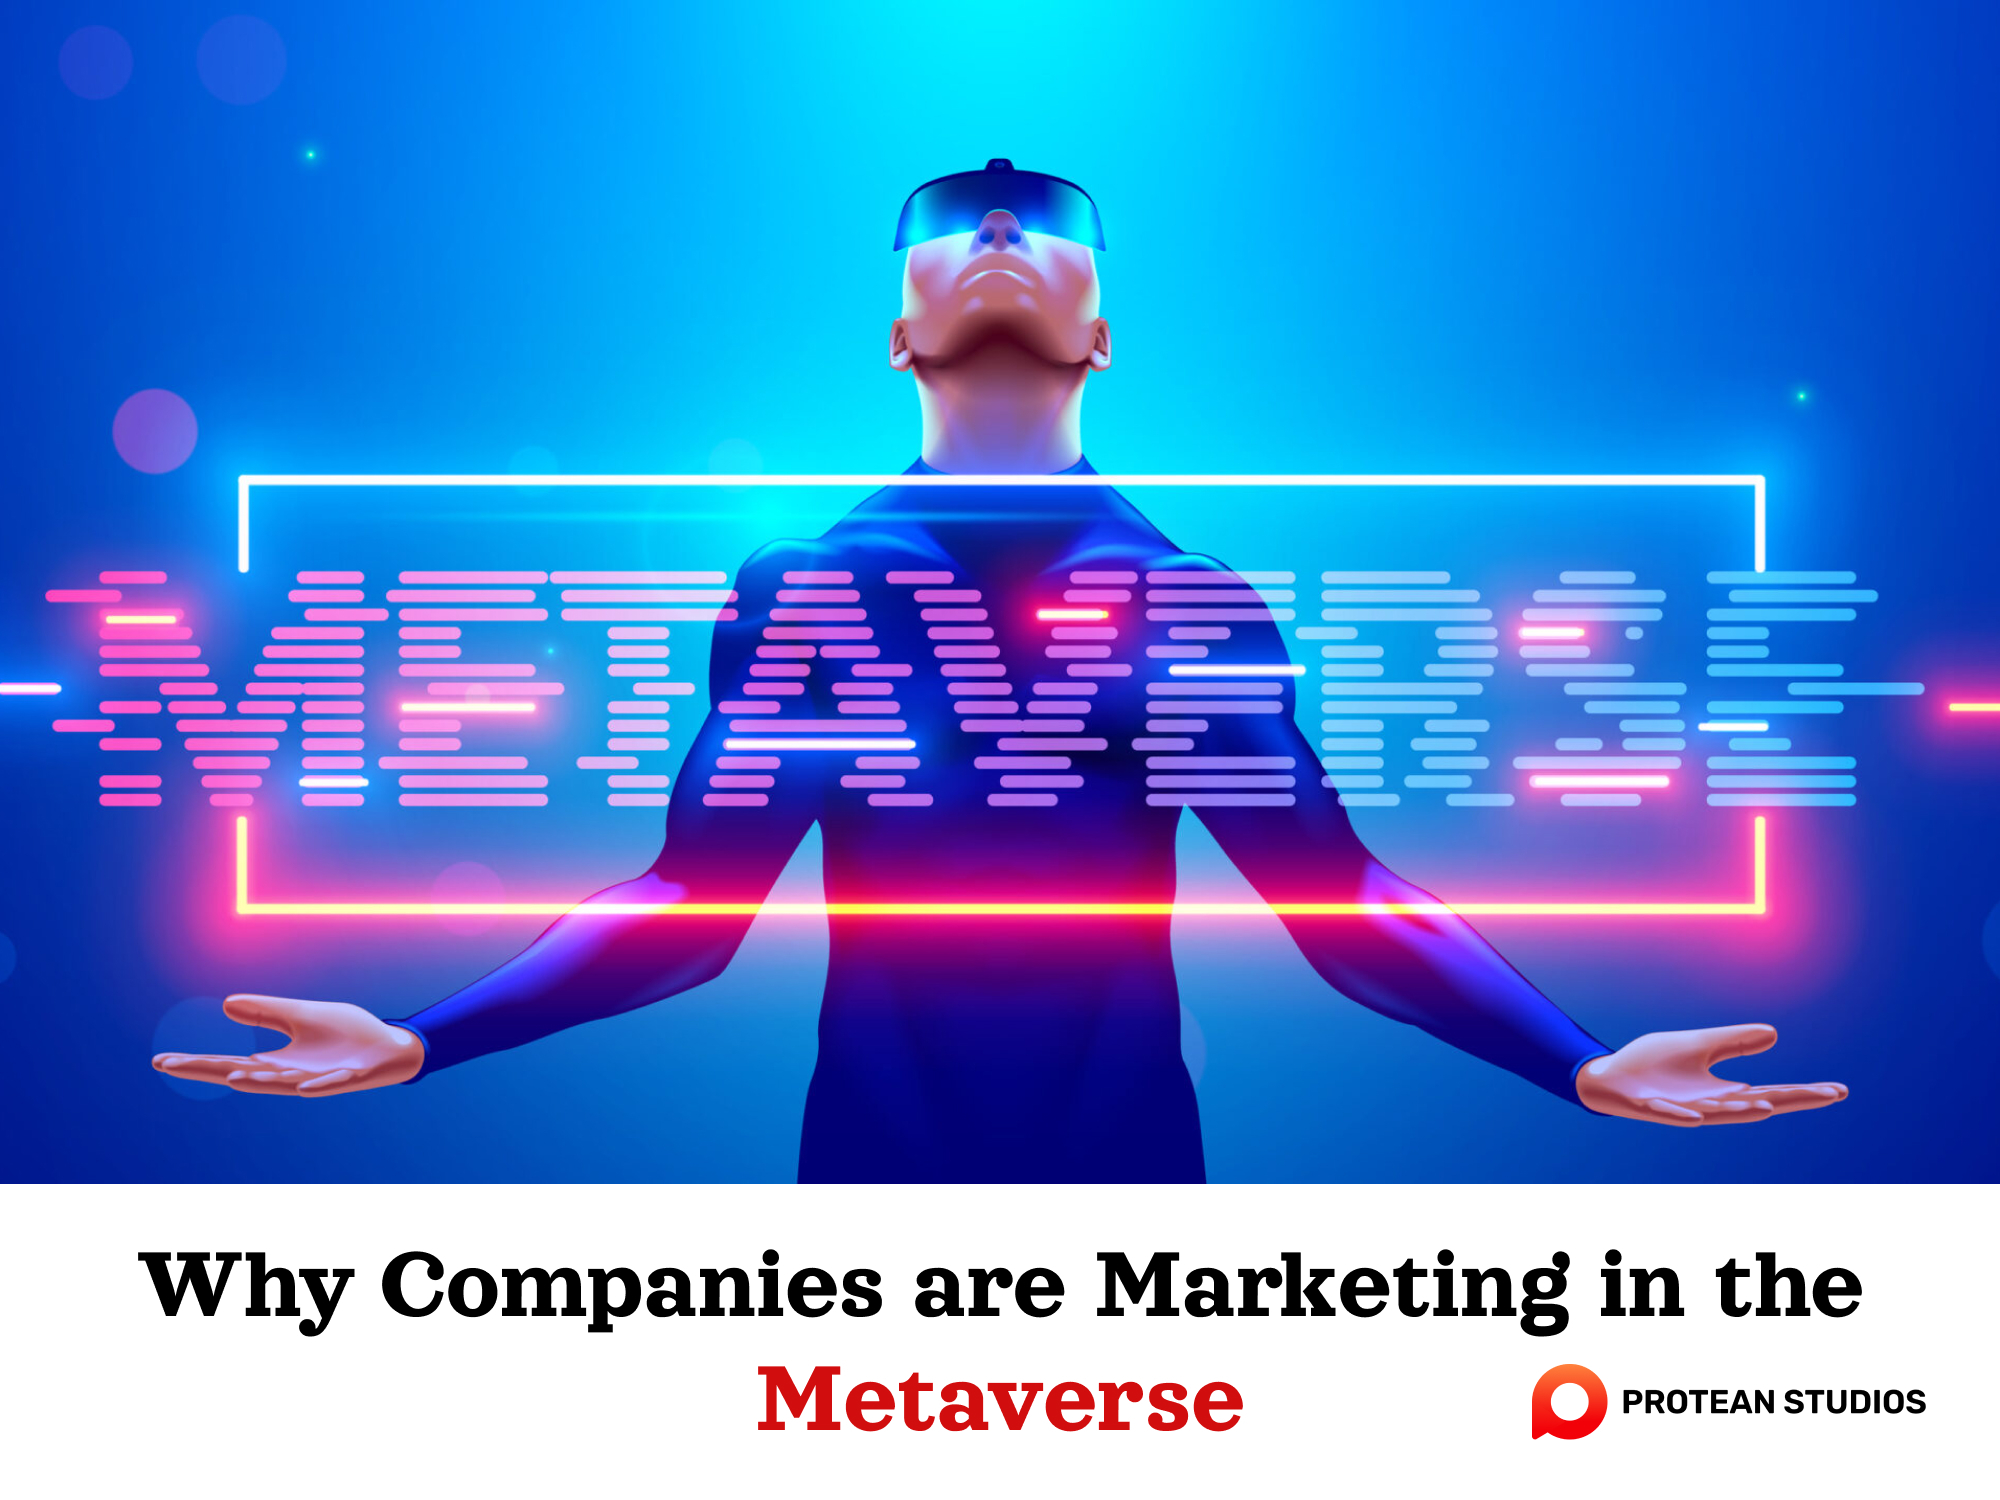 Marketing activity in the metaverse